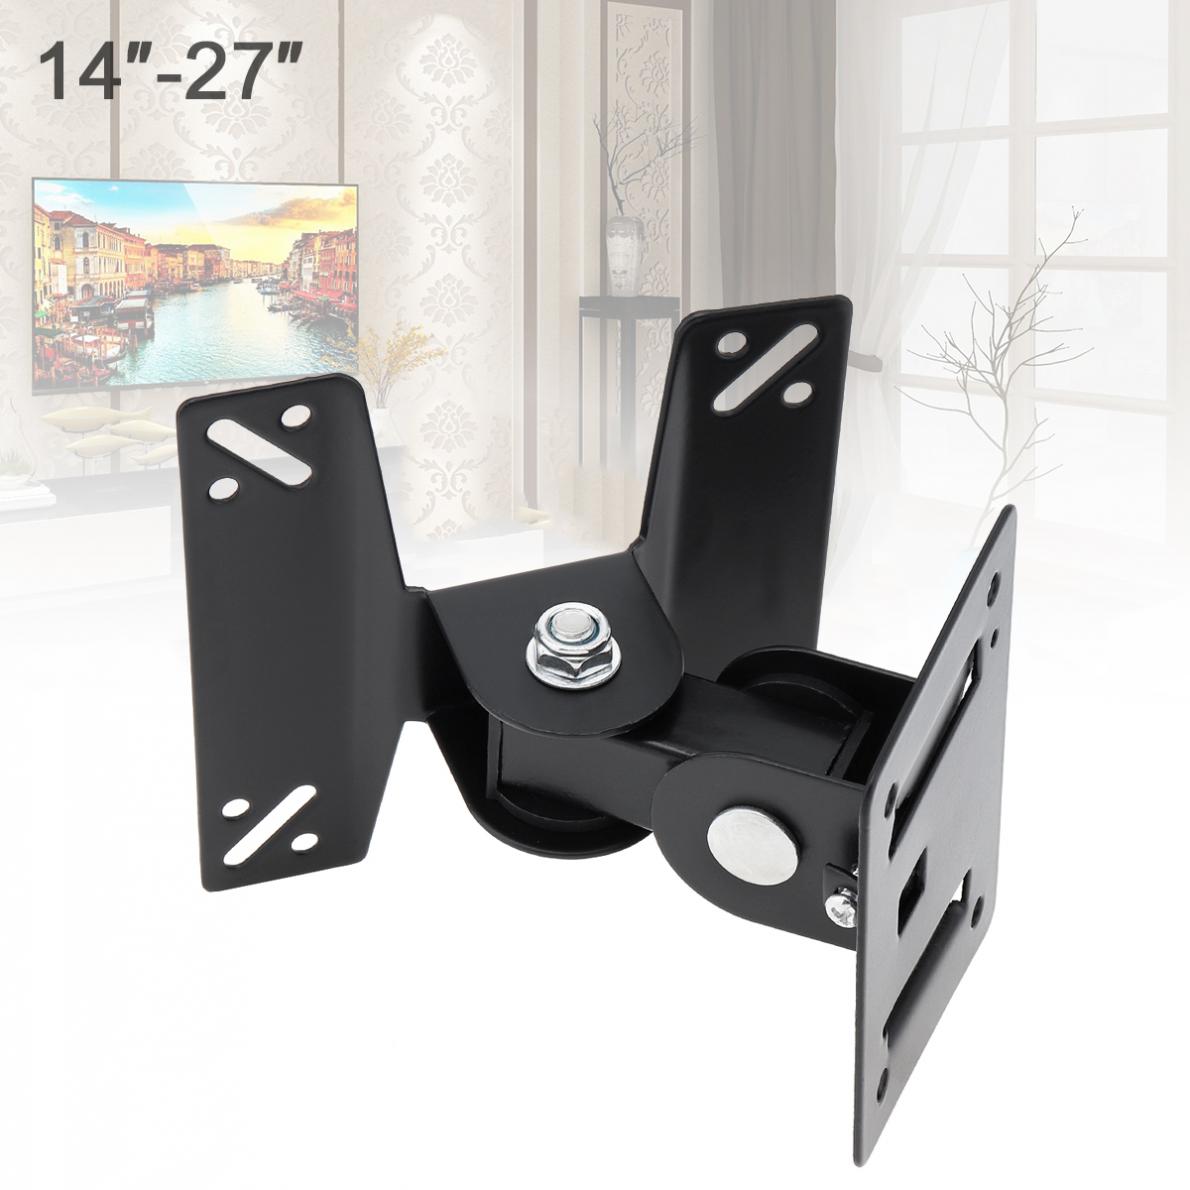 Universal Adjustable 10KG TV Wall Mount Bracket  Support 180 Degrees Rotation for 14 ~  27  Inch LCD LED Flat Panel TV